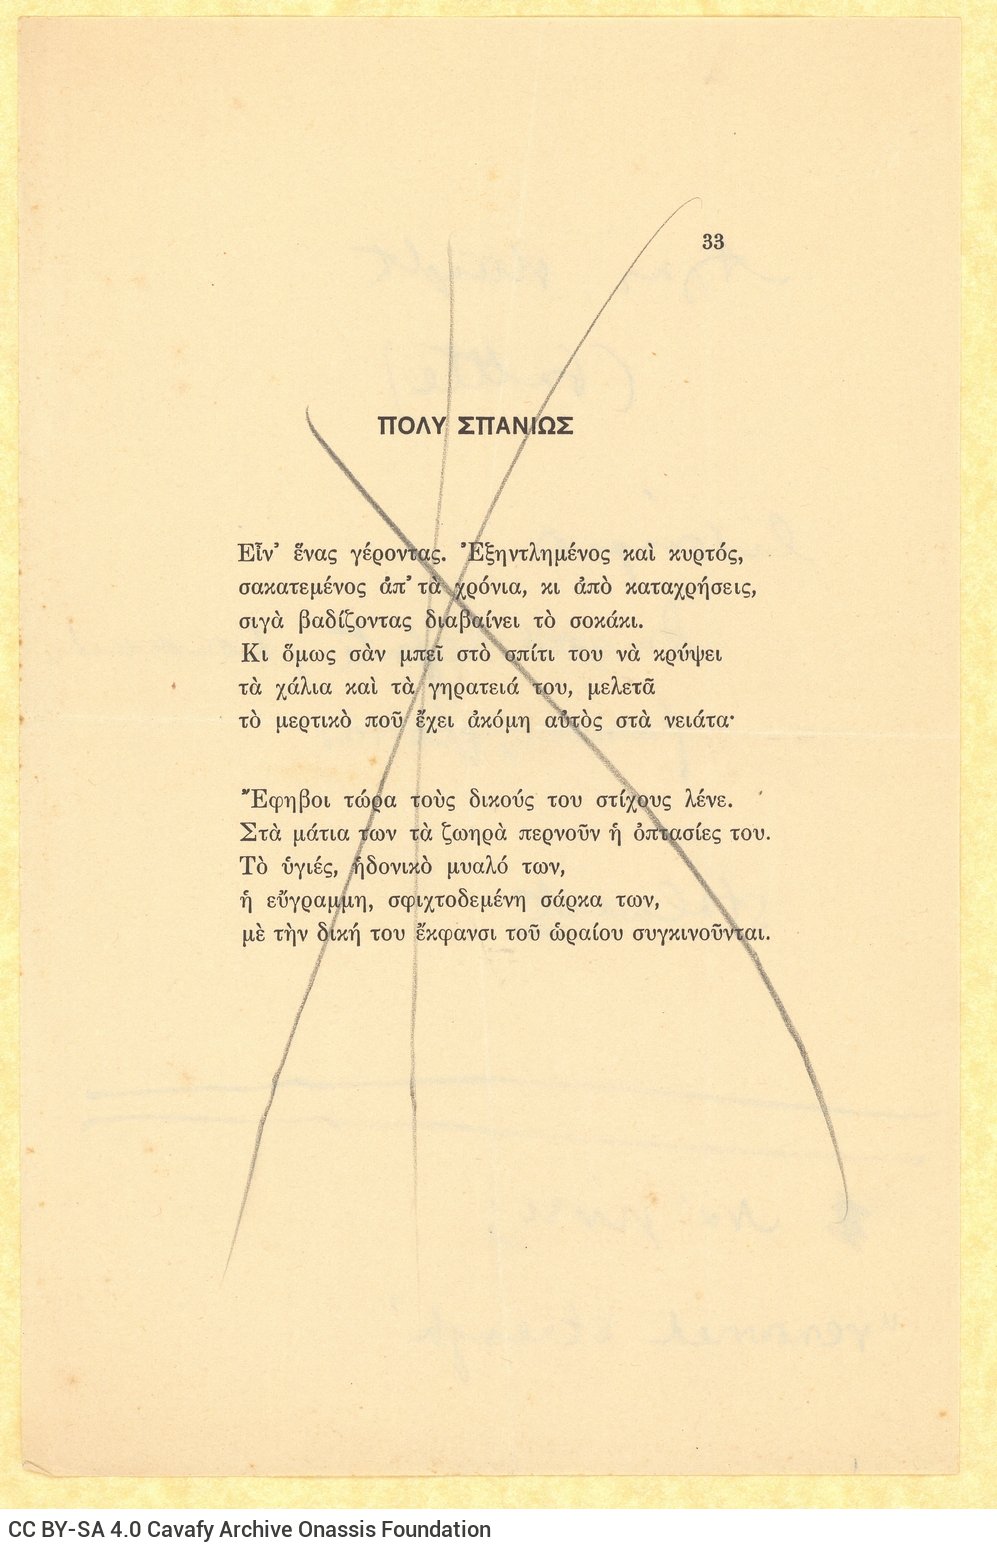 Handwritten English translation of the poem "Young Men of Sidon (400 A.D.)" by G. Valassopoulo on both sides of a sheet; h